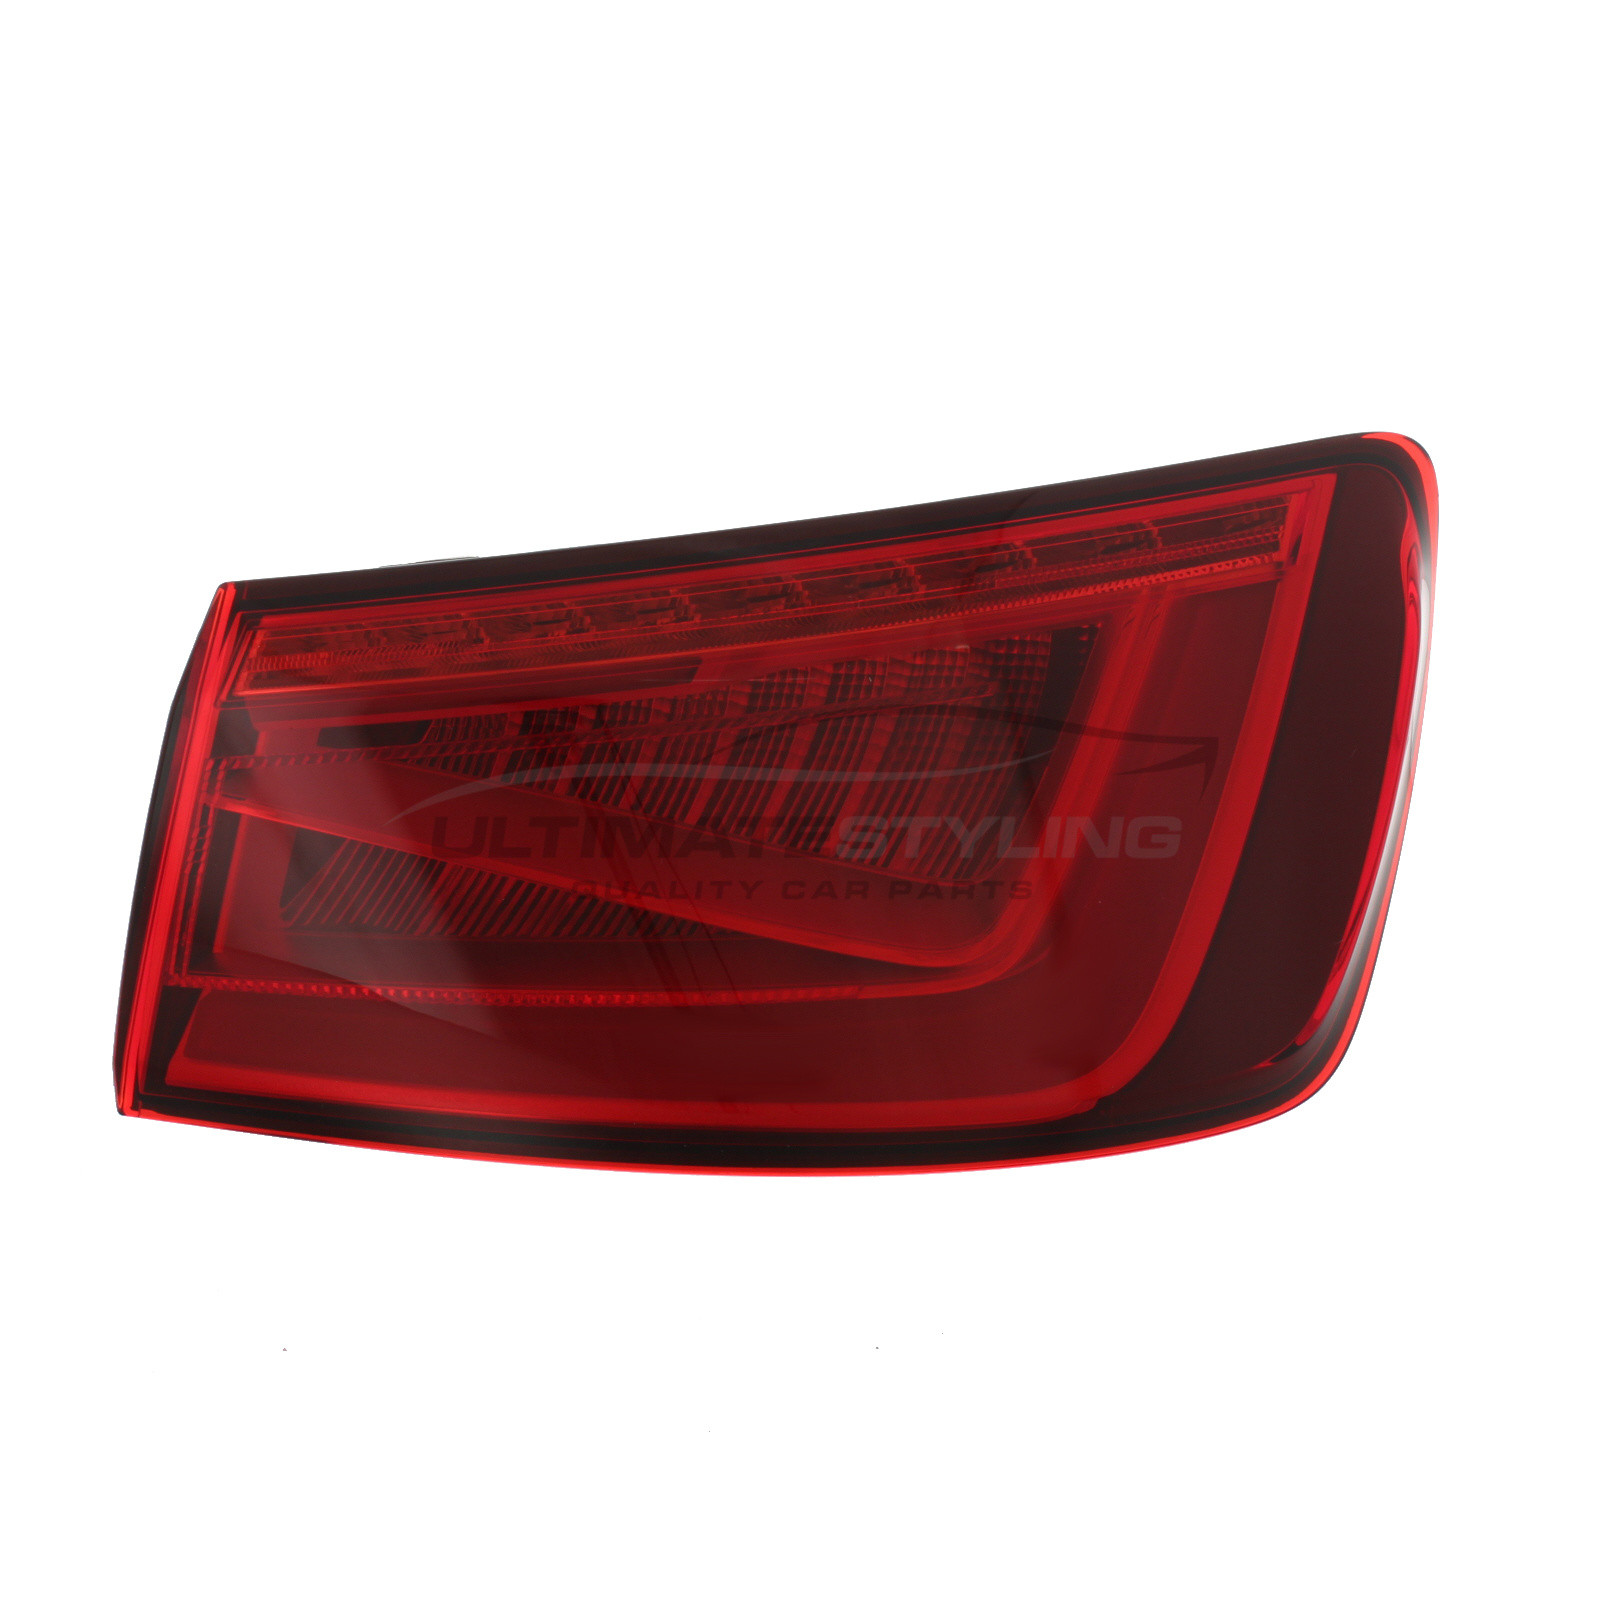 Audi A3 2013-2016 / Audi S3 2014-2016 LED with Red Indicator Outer (Wing) Rear Light / Tail Light Including Bulb Holder Drivers Side (RH)